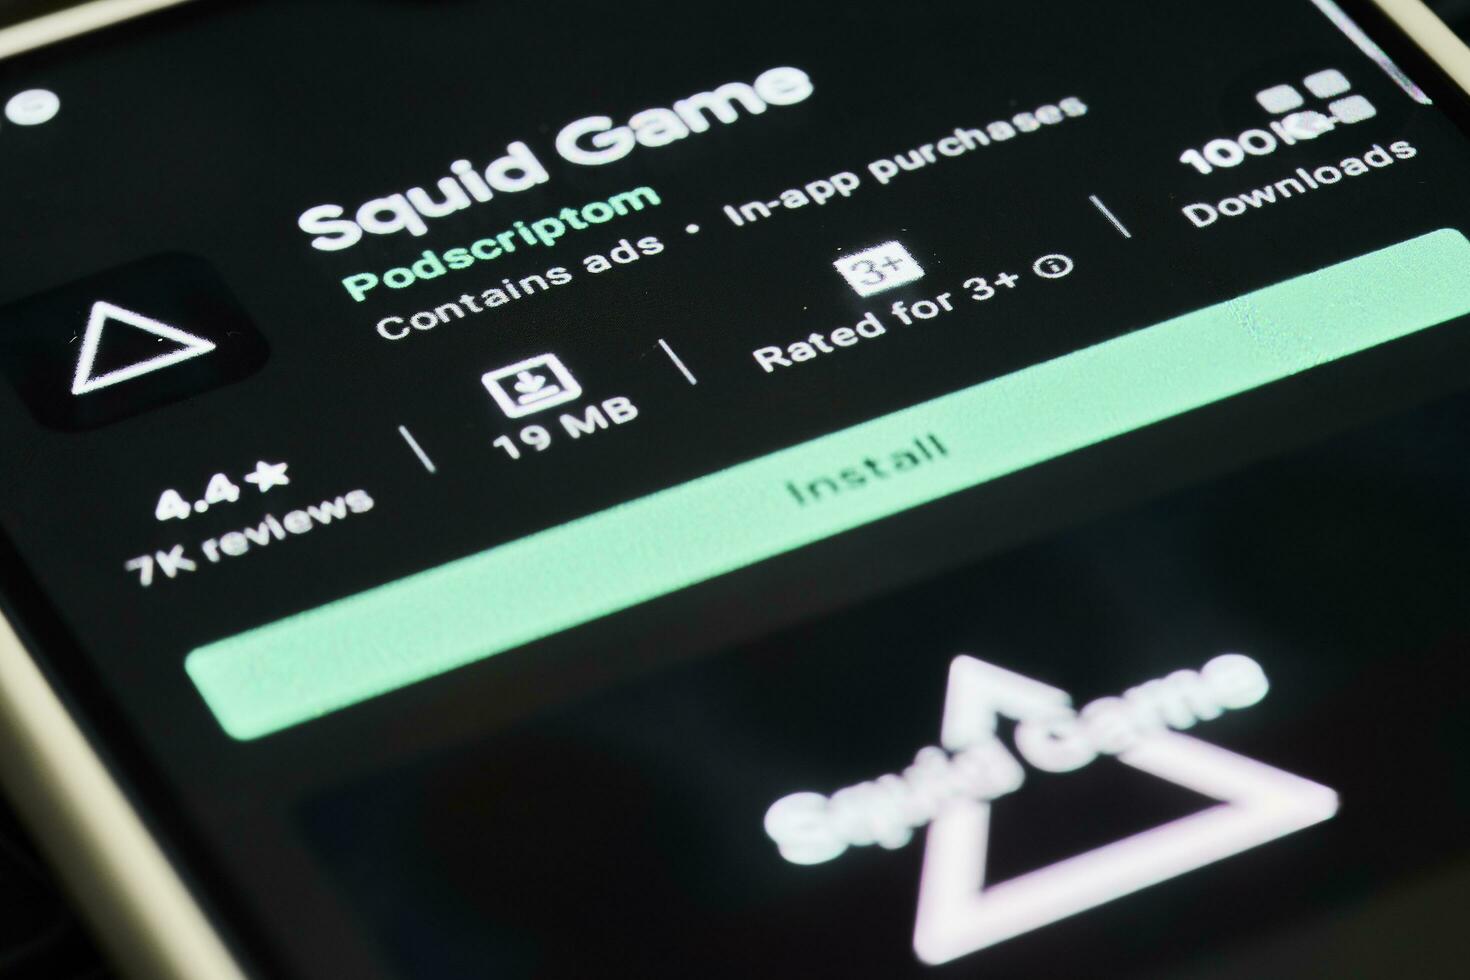 Popular Netflix new show - Squid games mobile game application photo